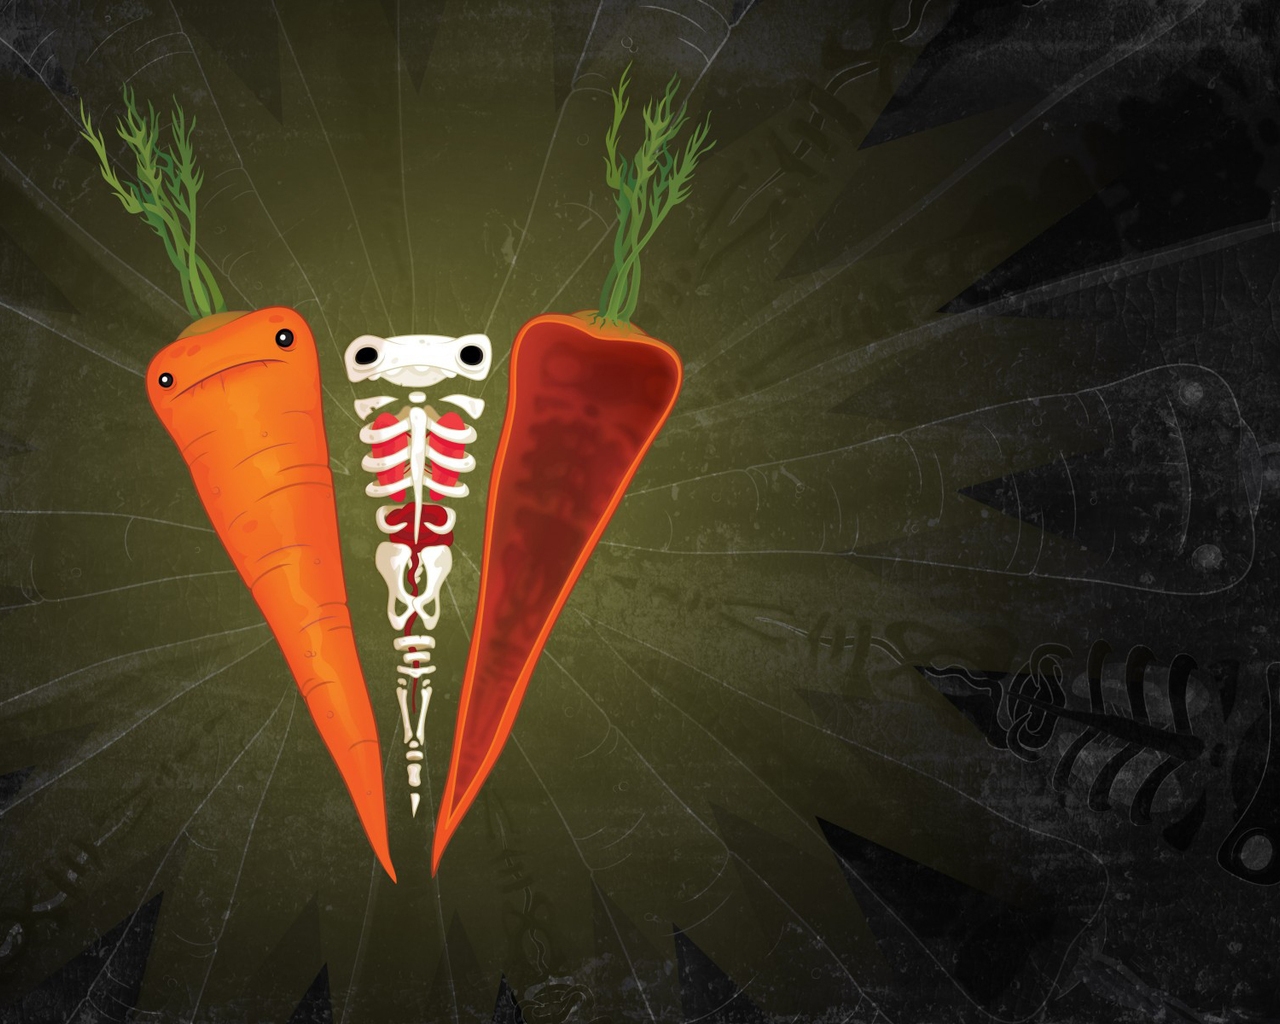 Carrots for 1280 x 1024 resolution